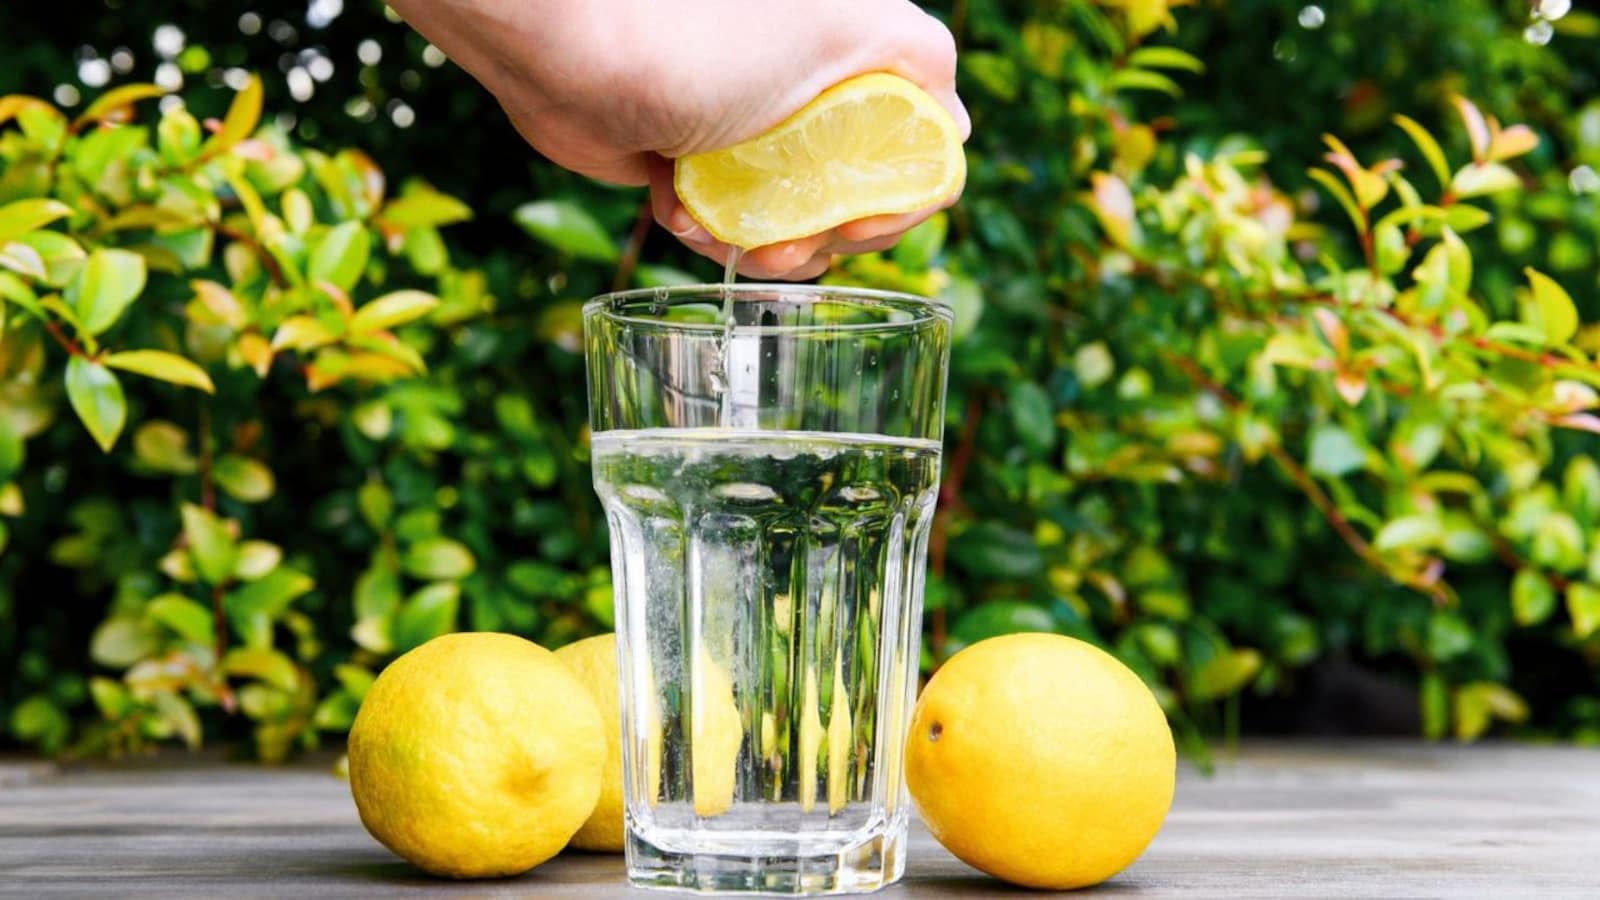 https://images.moneycontrol.com/static-mcnews/2023/04/lemon-juice-for-morning.jpg?impolicy=website&width=1600&height=900